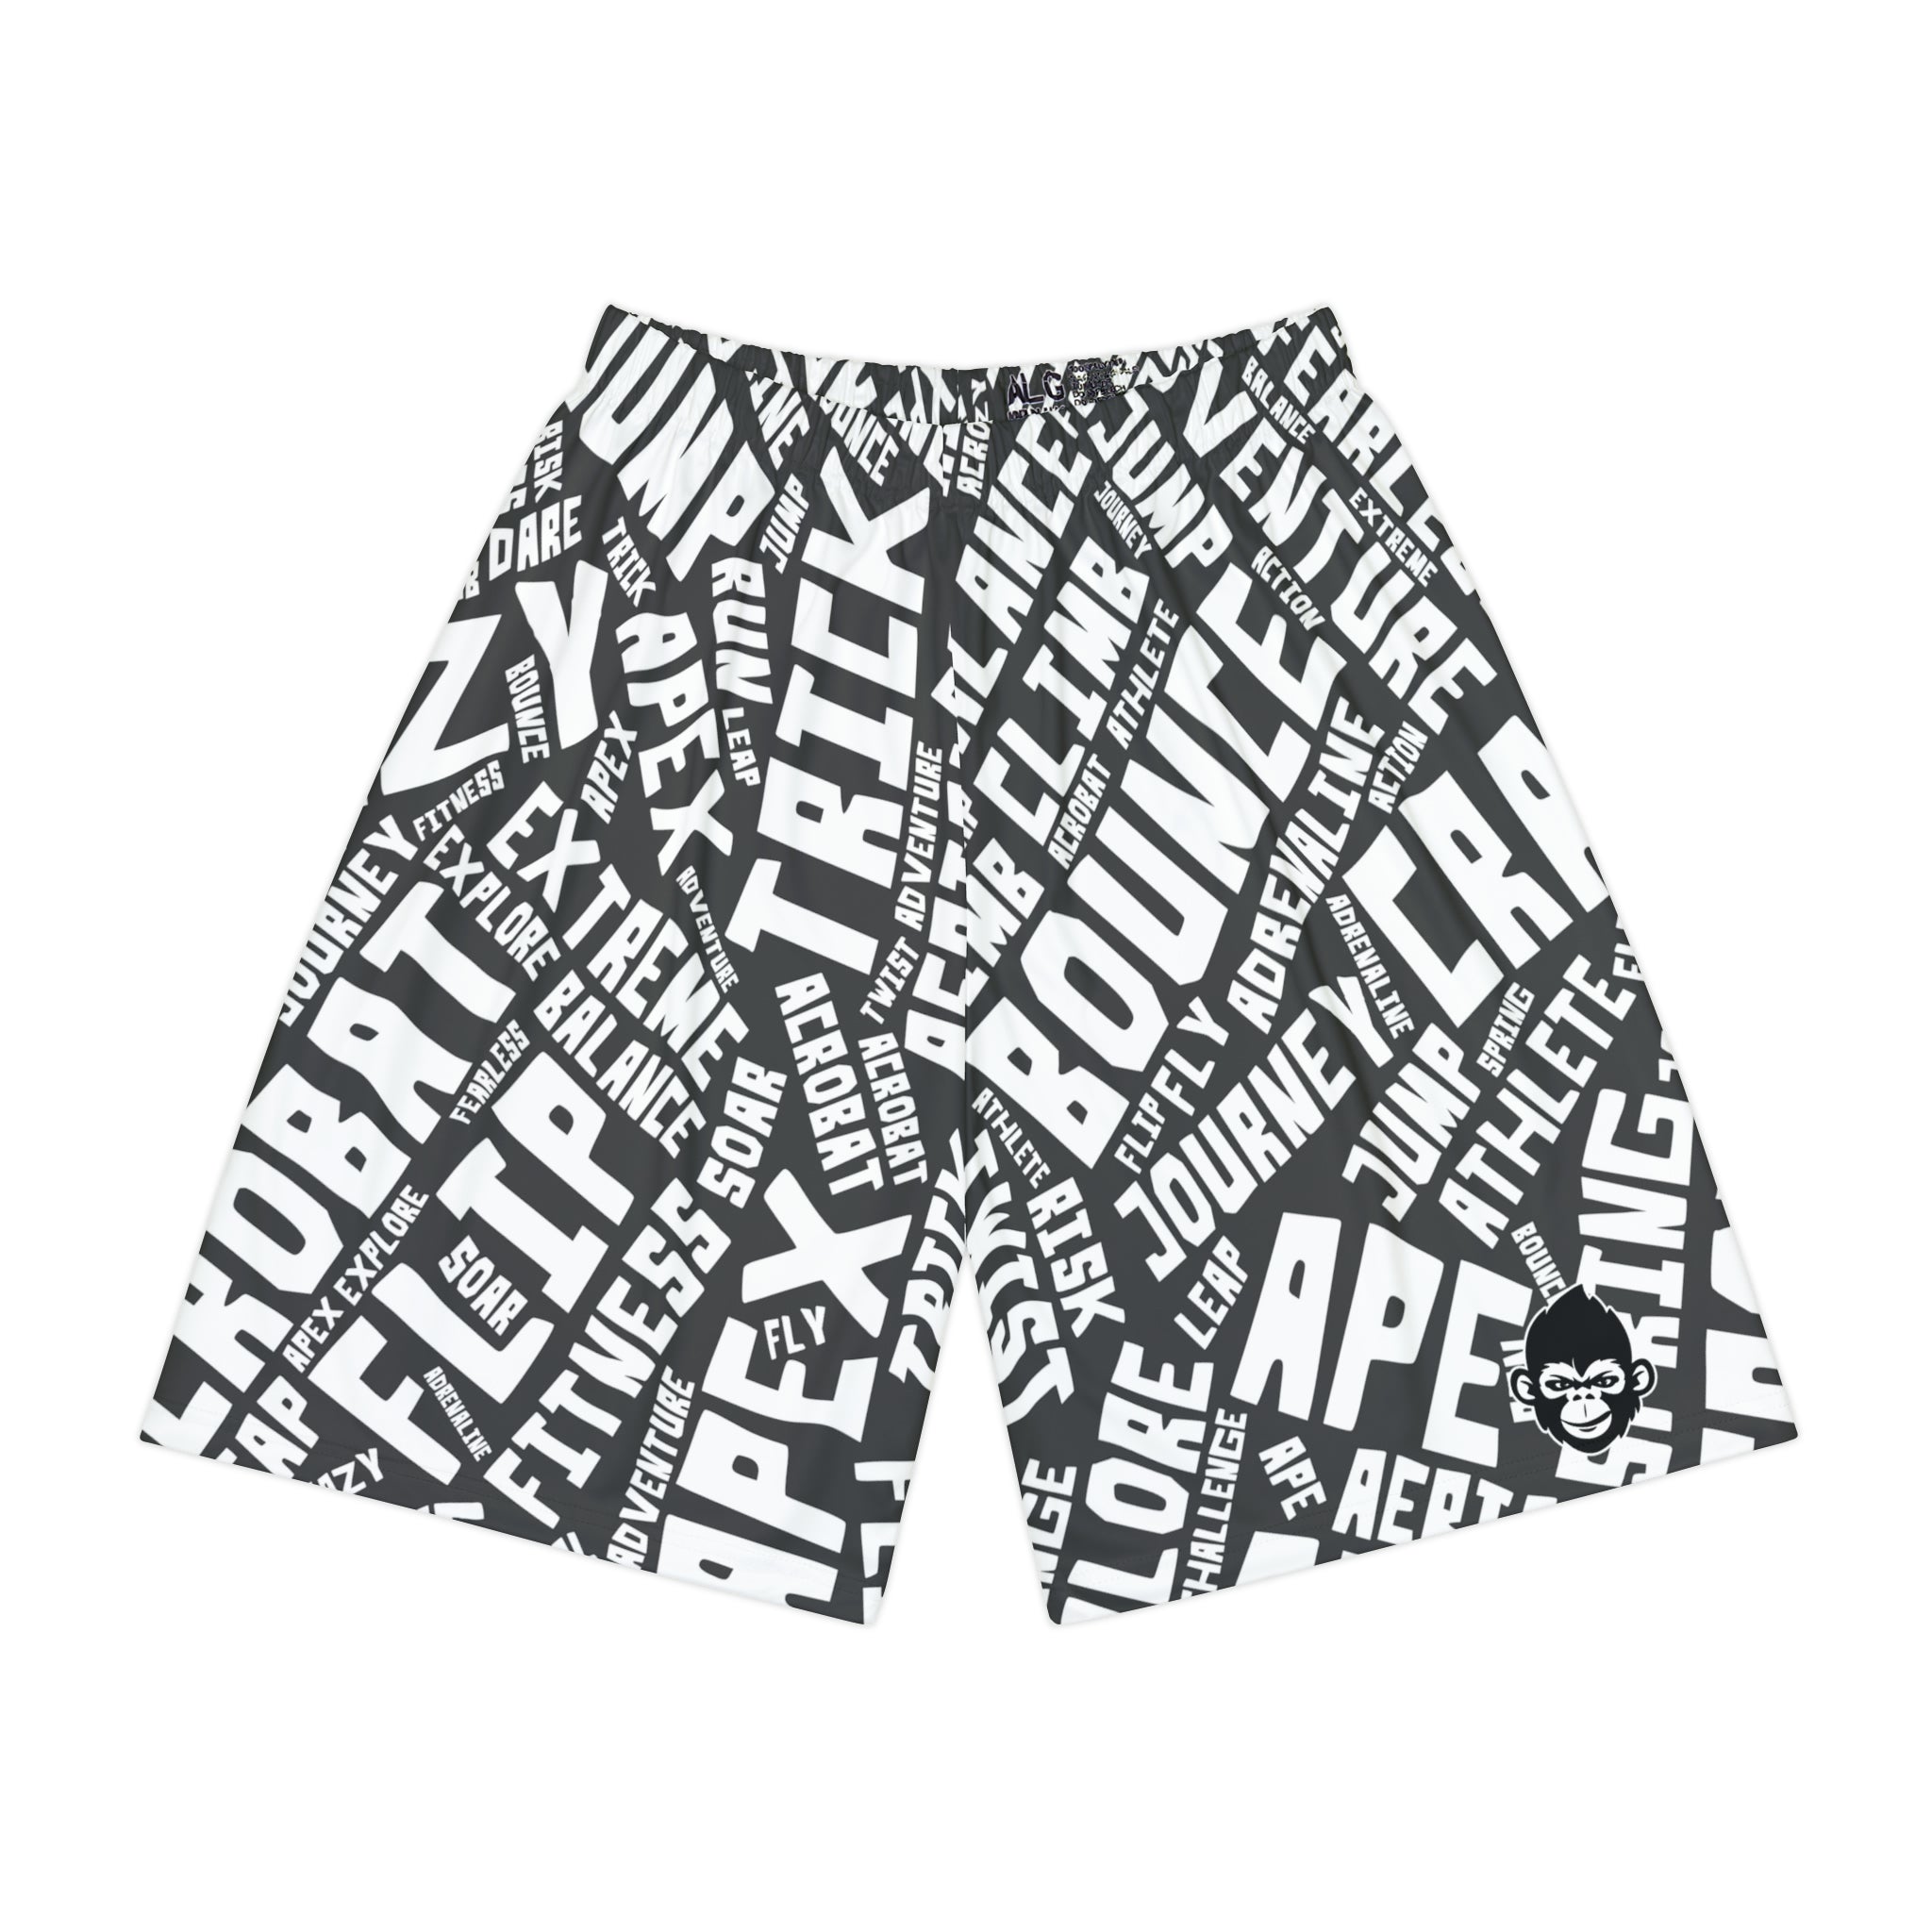 Wordcloud Gym Shorts (White Text) - Crazy Ape Extreme Equipment